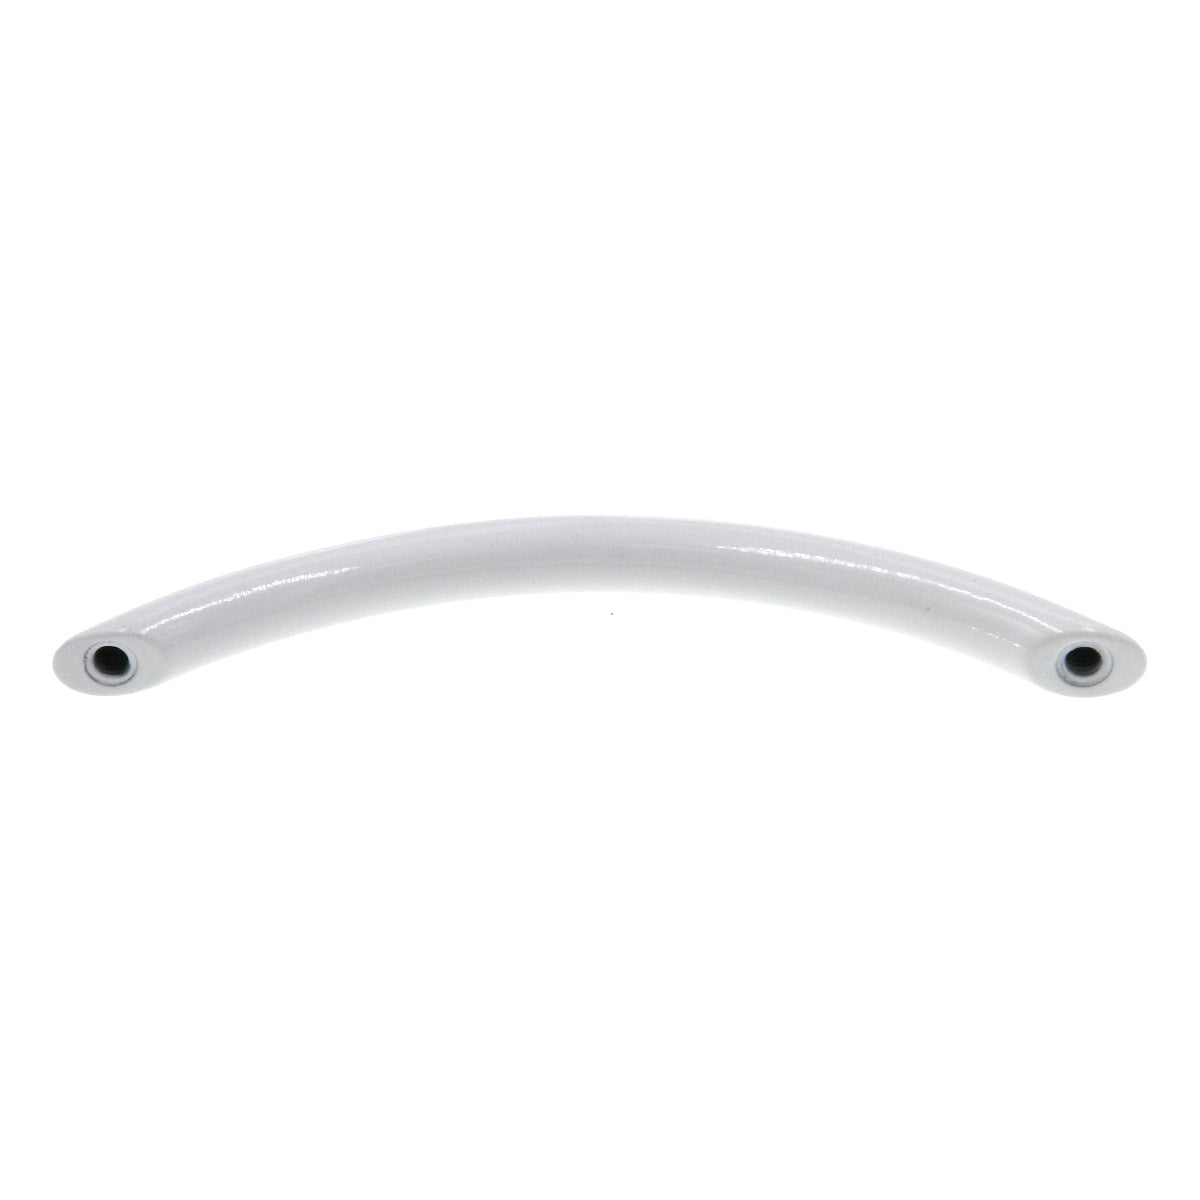 Amerock Basic Metals White 3 3/4" (96mm)cc Arch Pull Bow Cabinet Pull BP5527-54